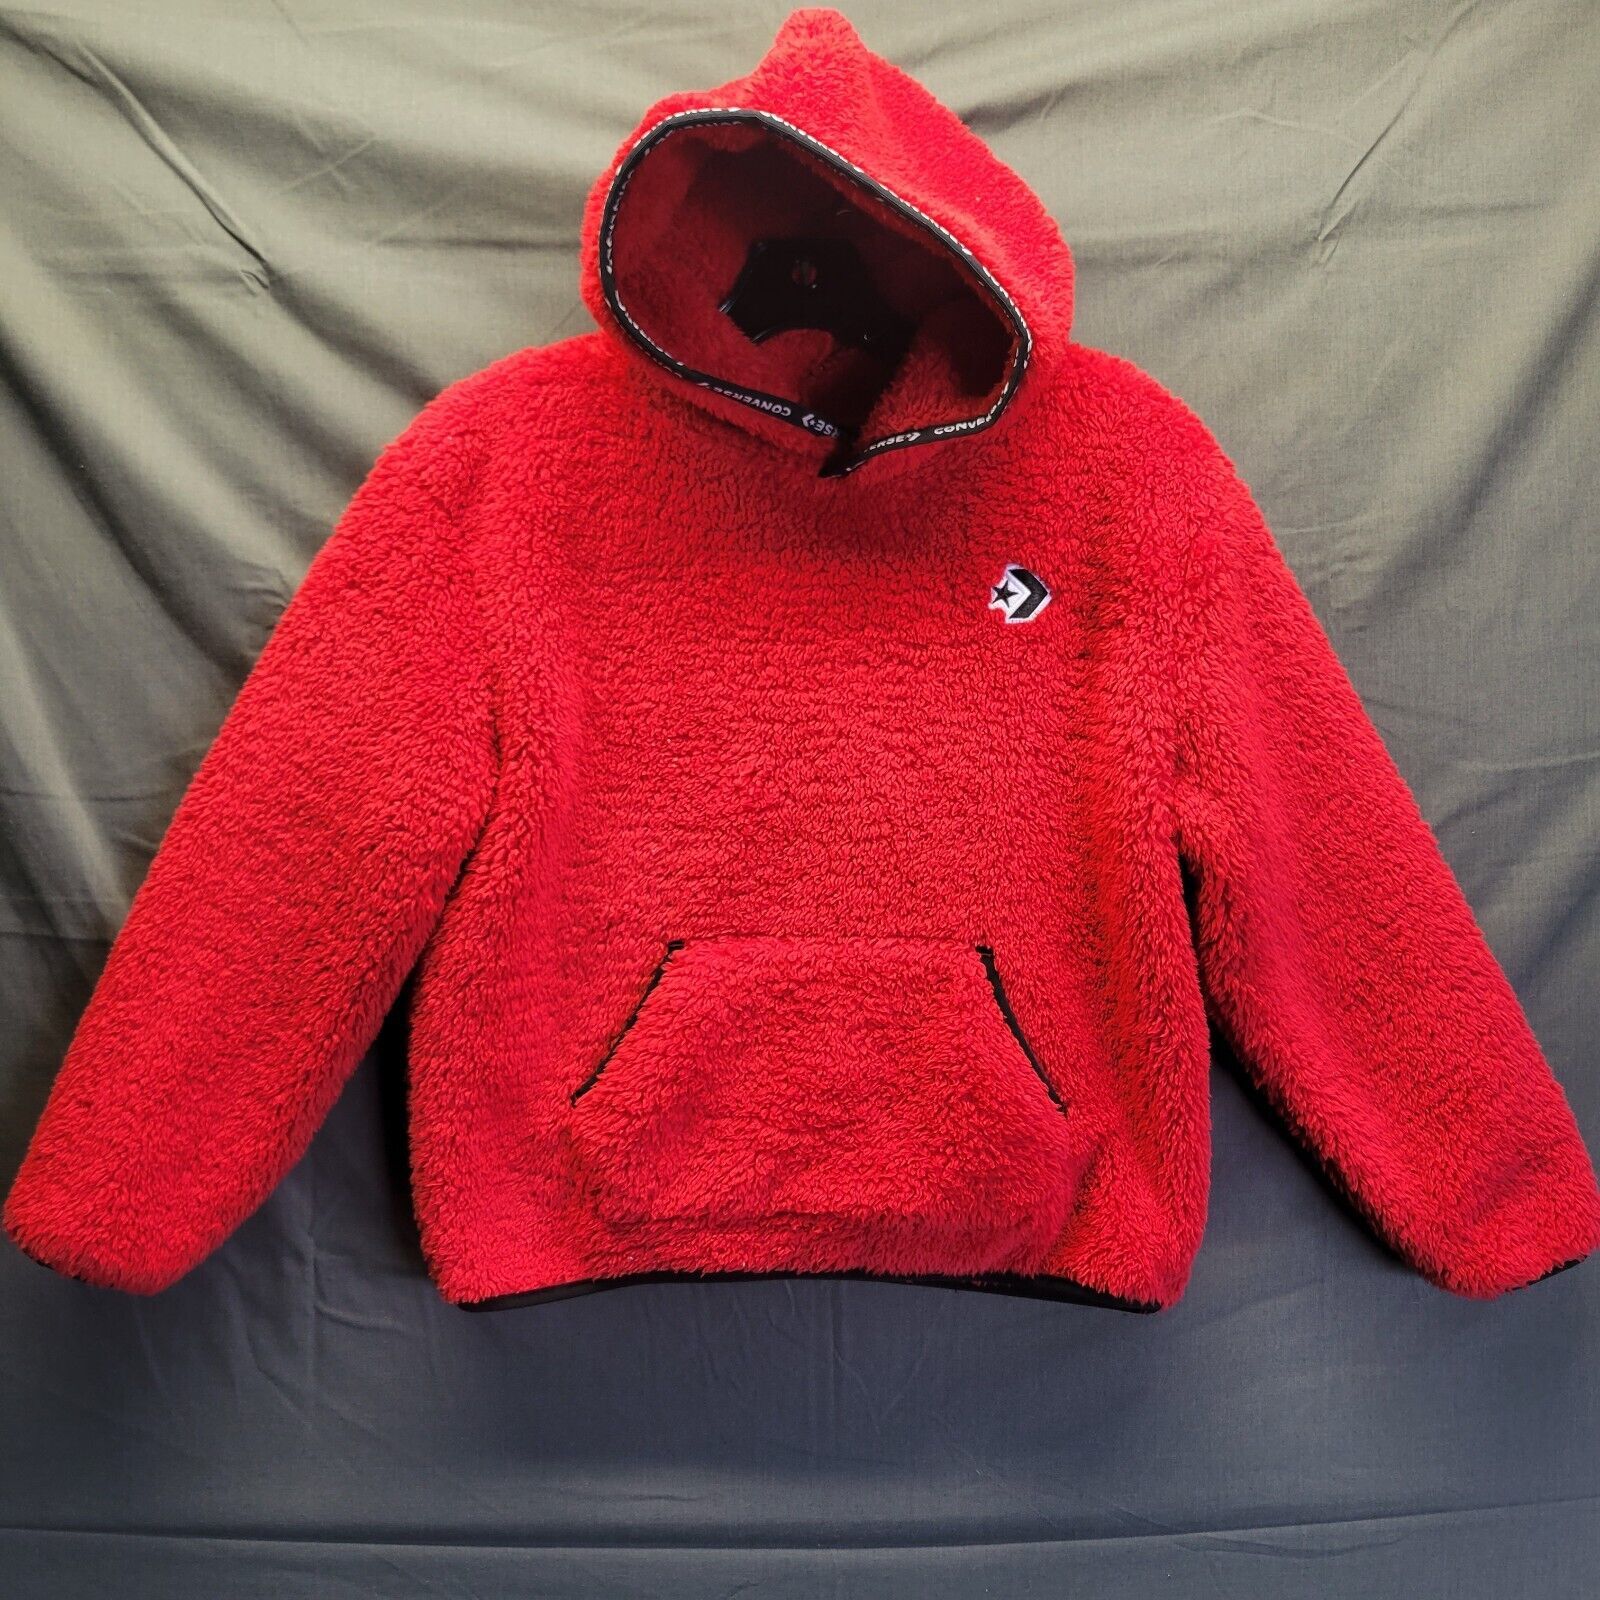 Converse Fleece Red Hooded Youth Jacket Small (8-10) Unisex - $25.48